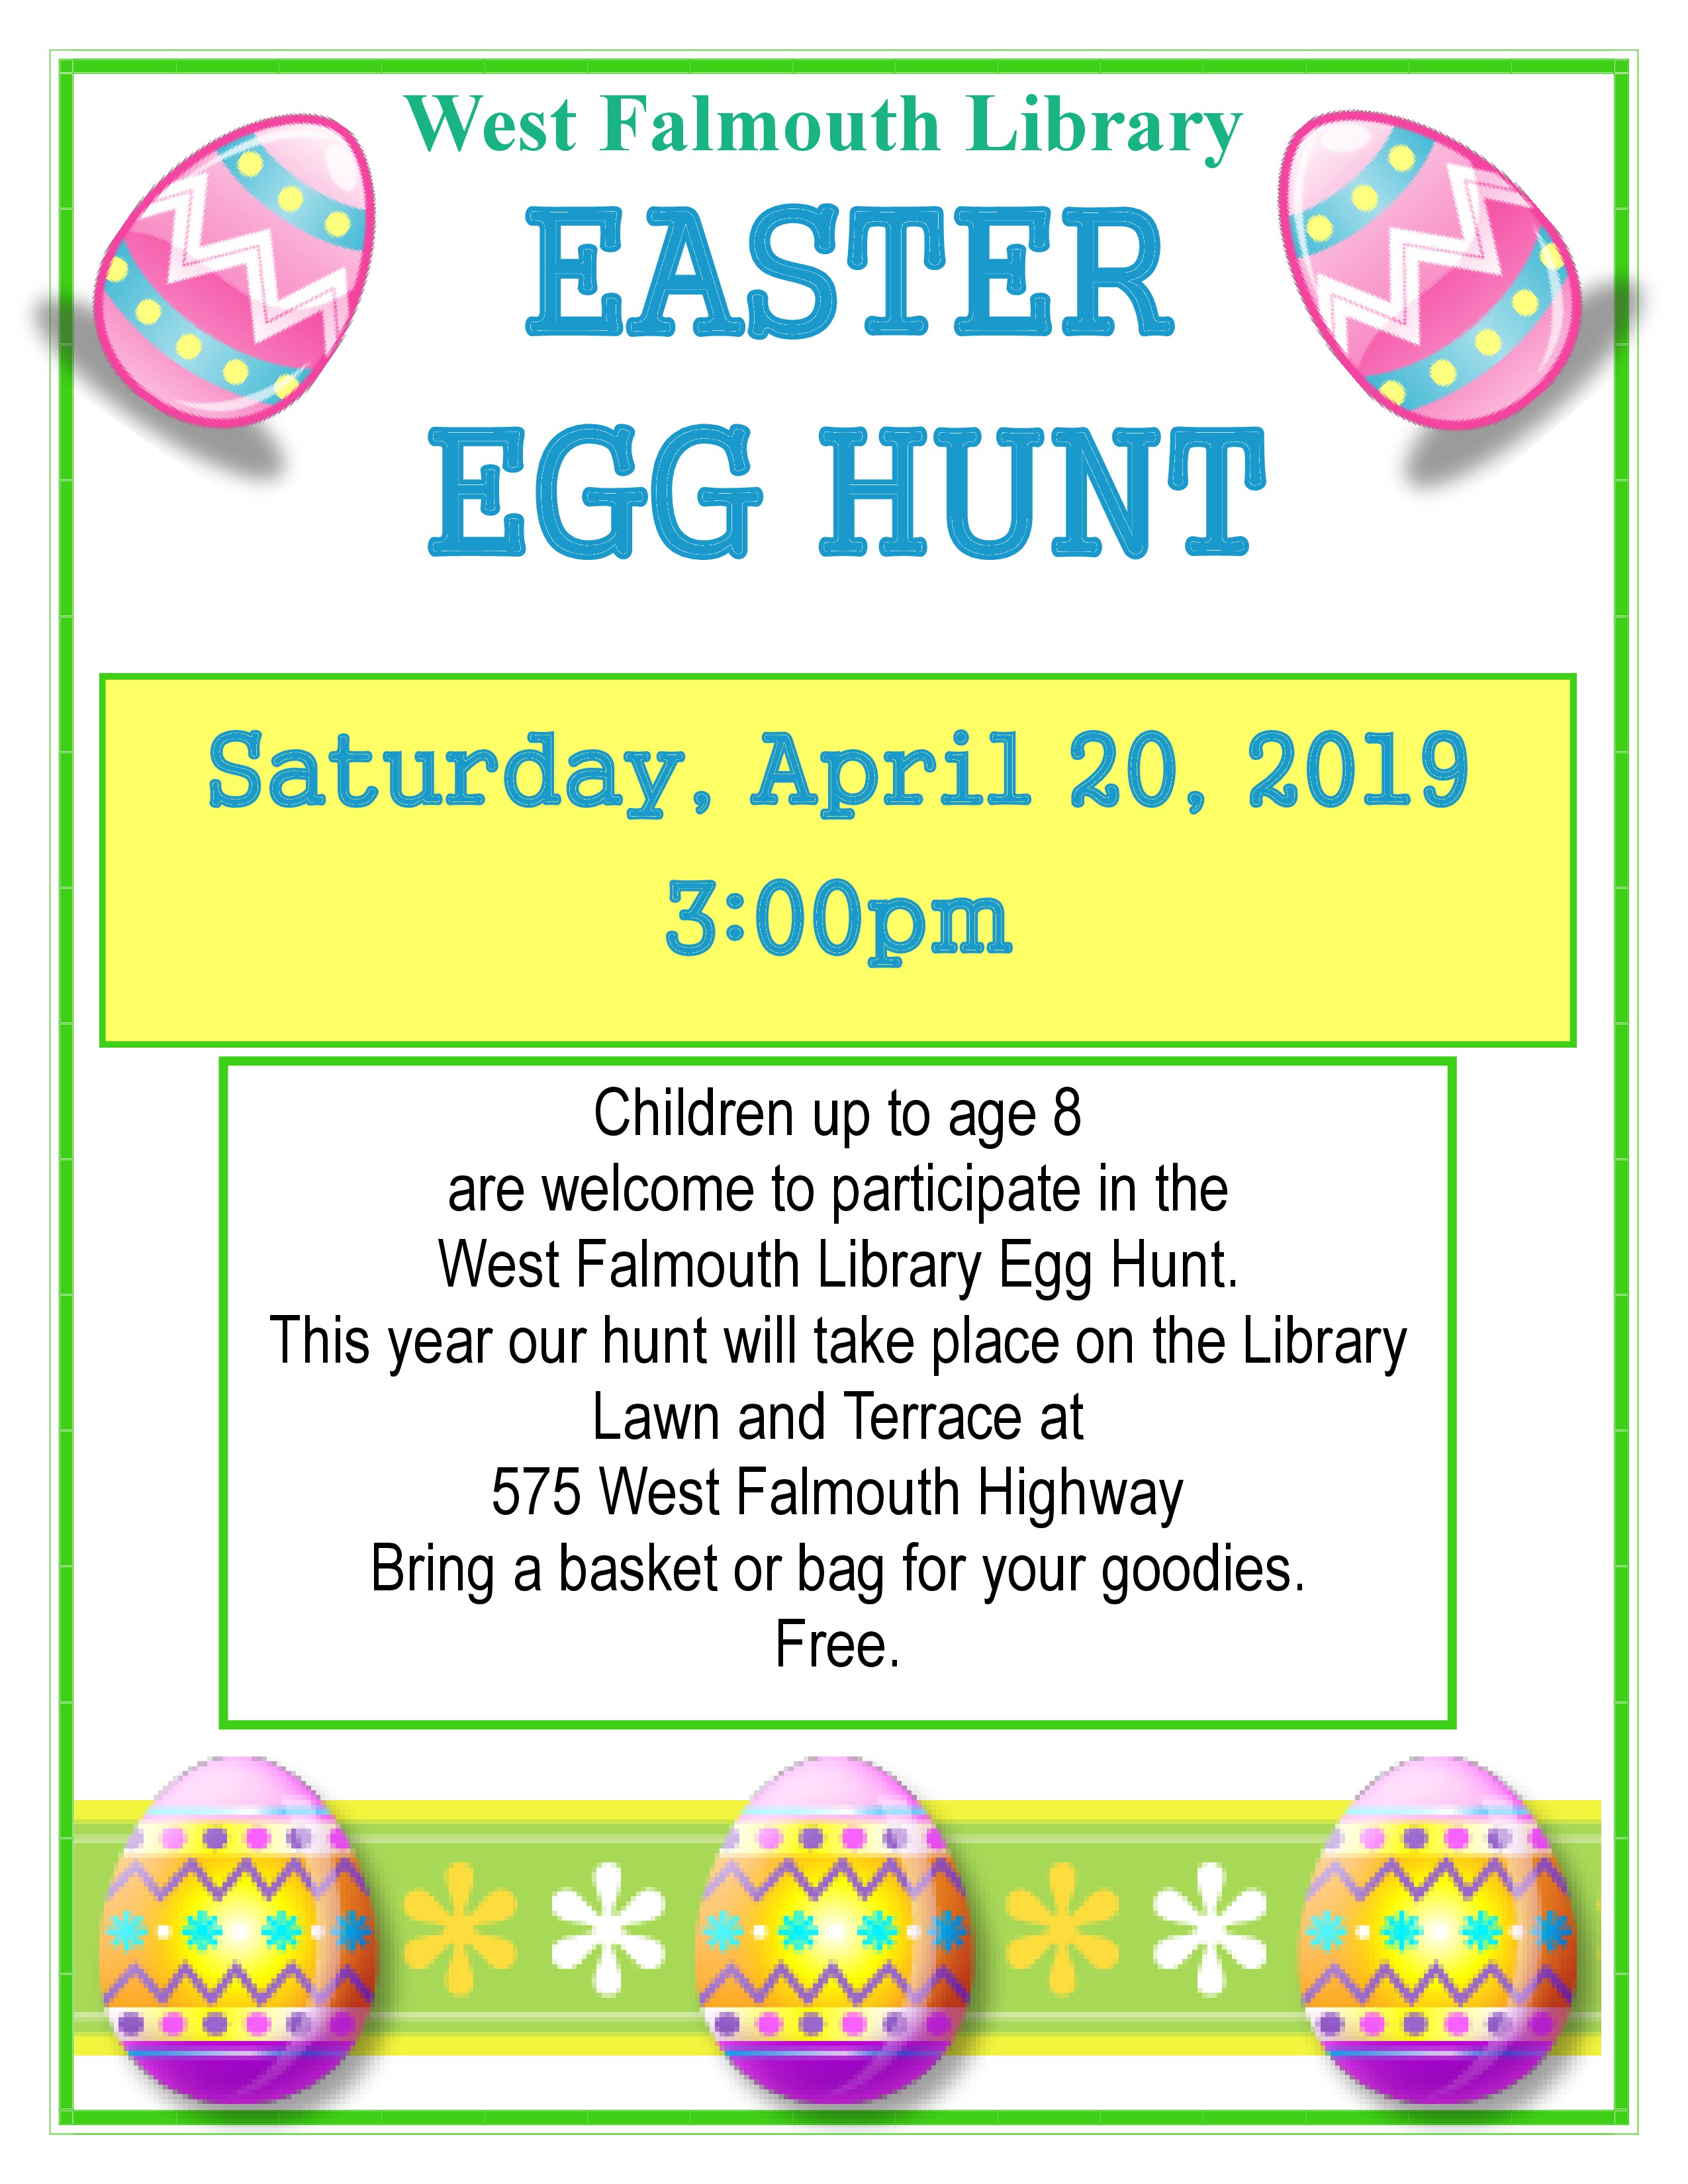 Easter Egg Hunt 2019 event flyerpage0 West Falmouth Library